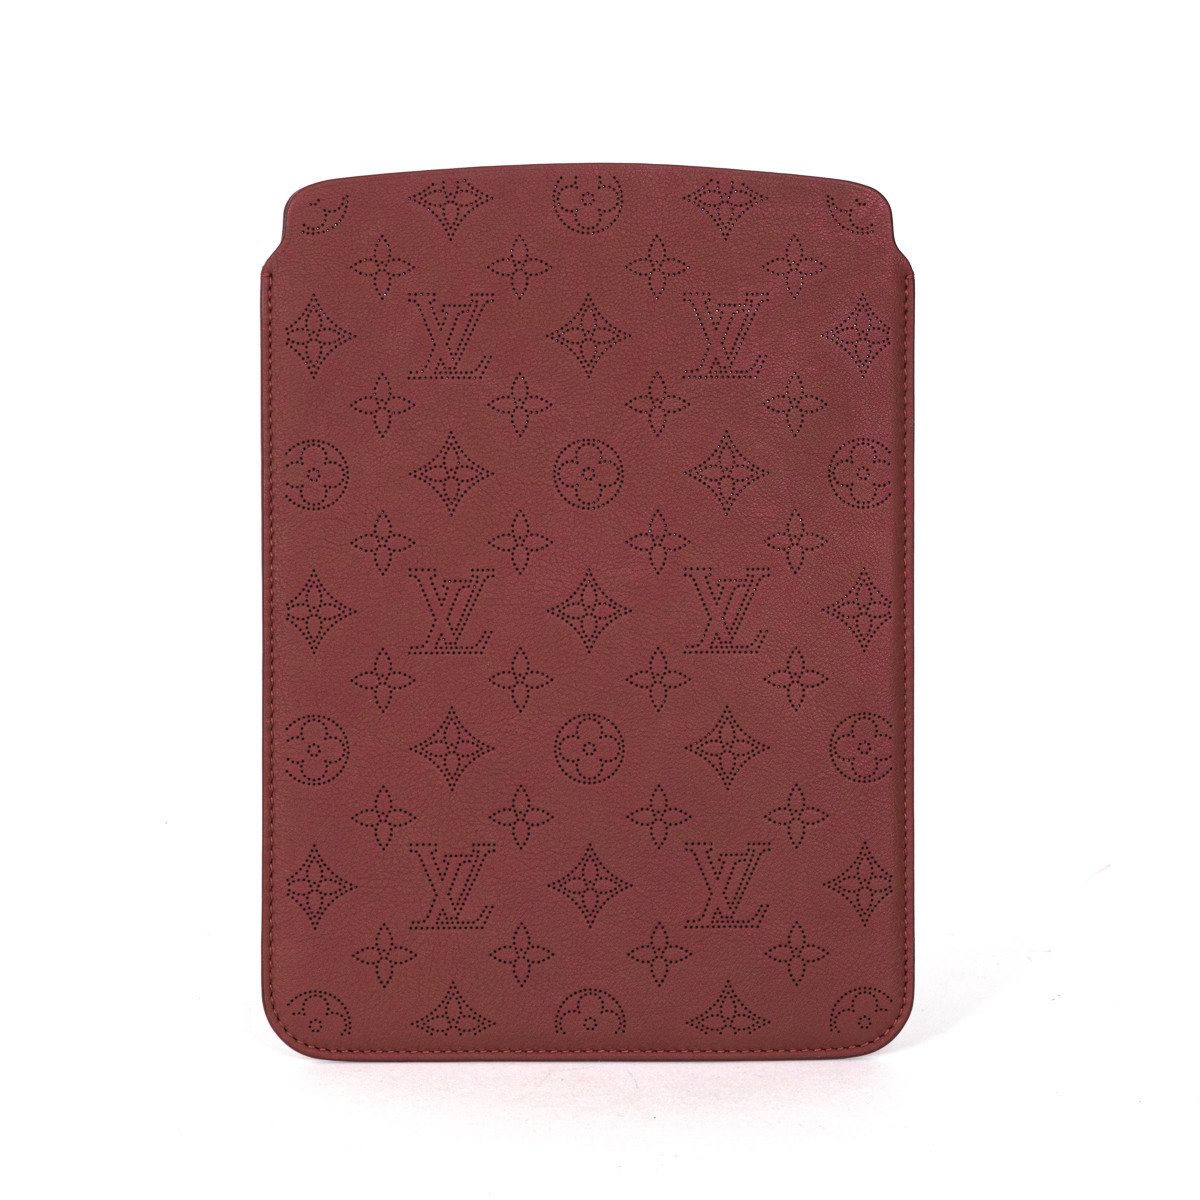 Louis Vuitton red pre-owned leather case.